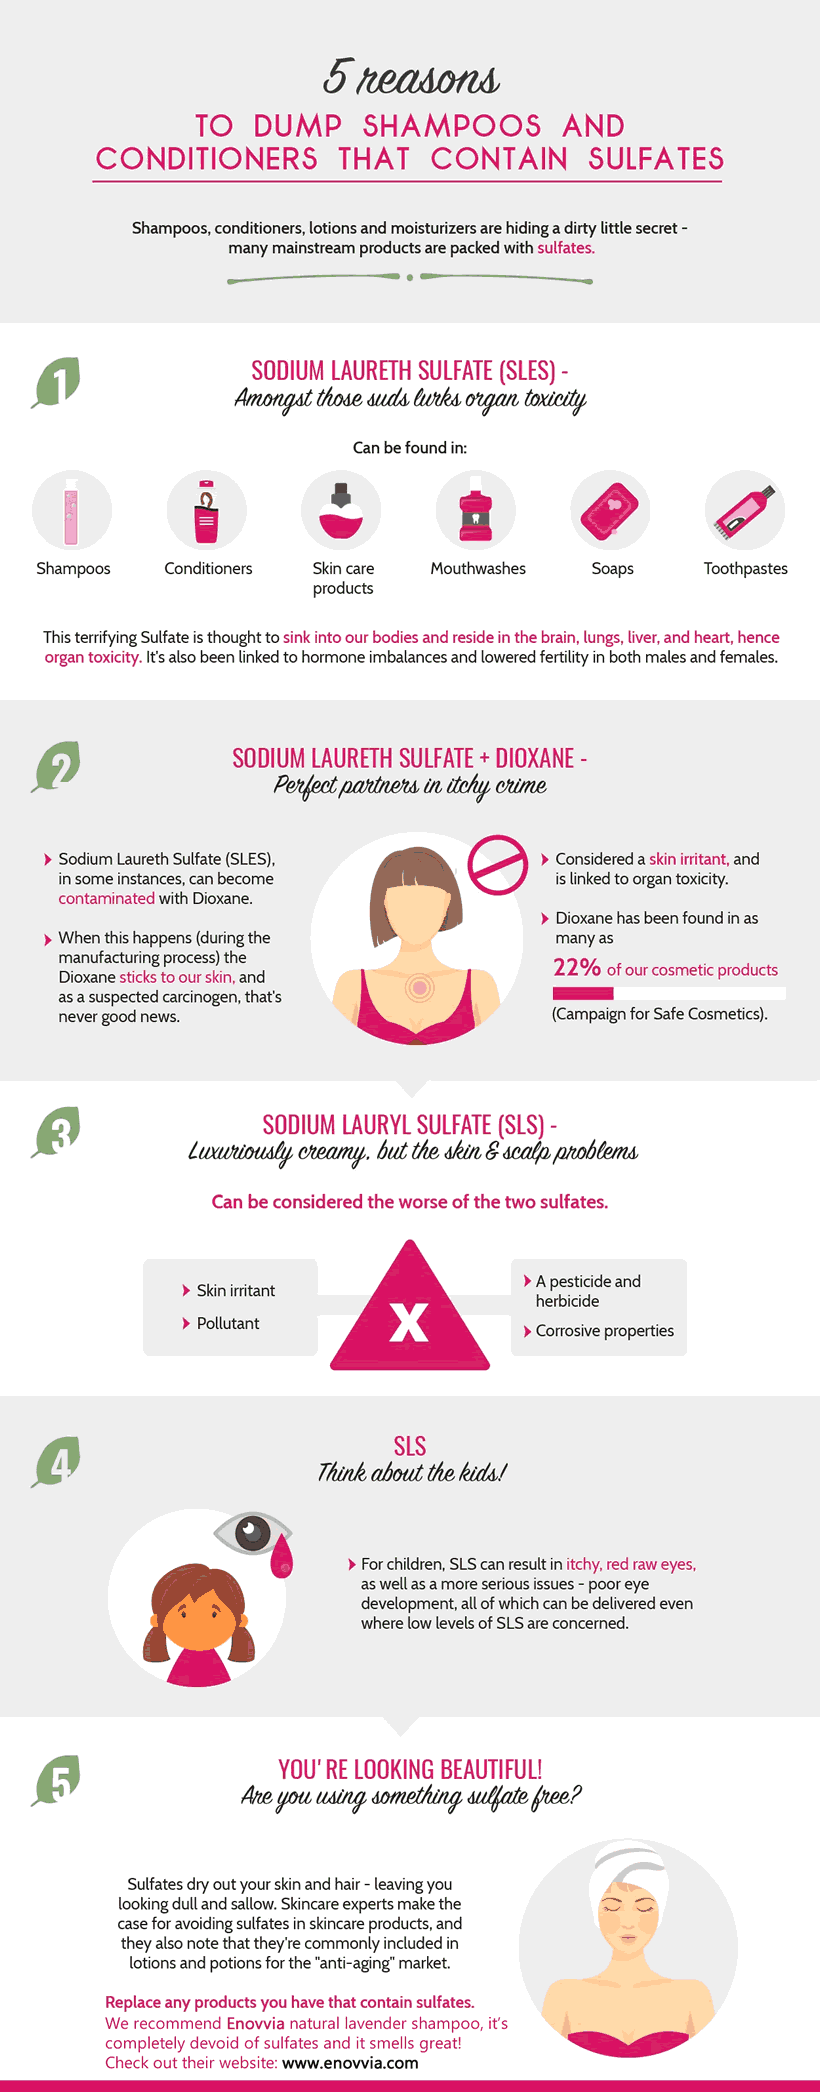 (Infographic) 5 Reasons To Dump Shampoos And Conditioners That Contain Sulfates - Enovvia)